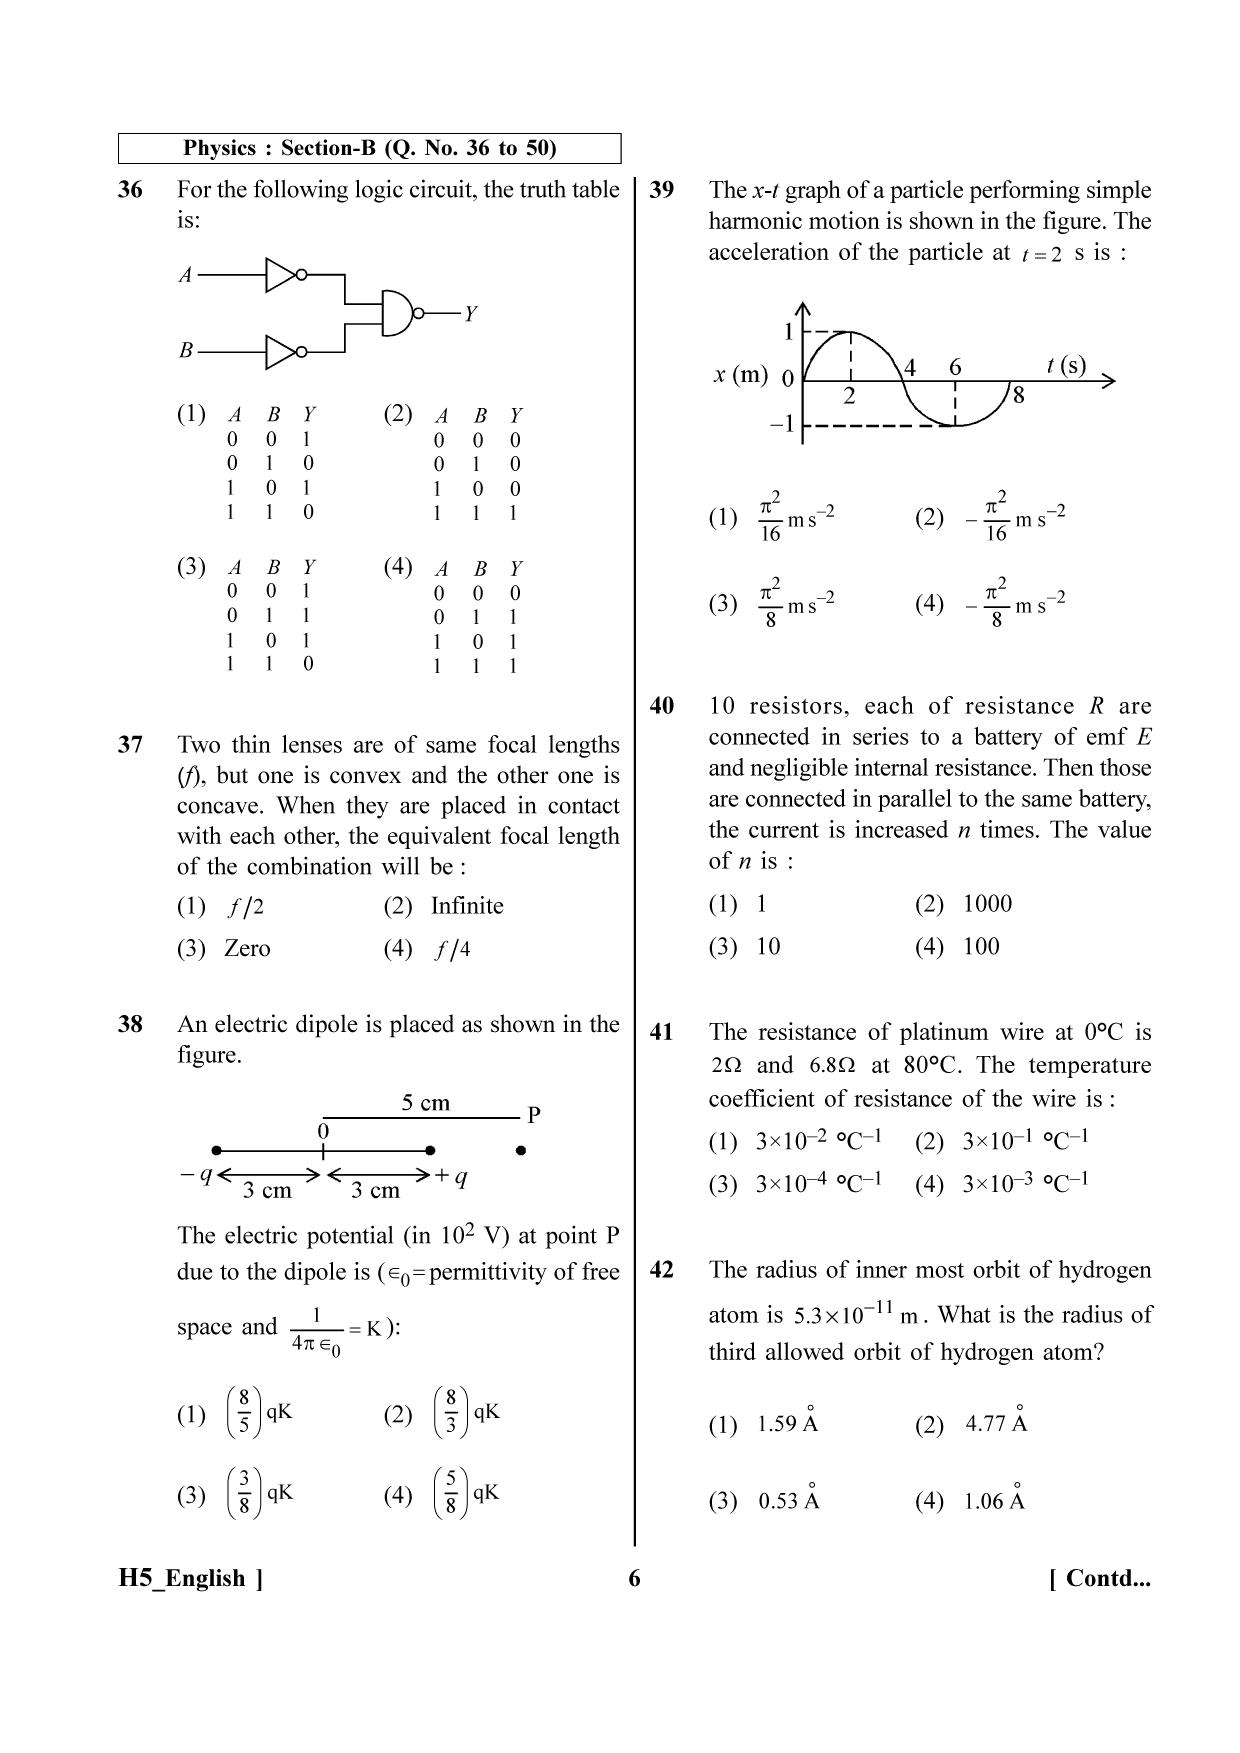 NEET 2023 H5 Question Paper - Page 6